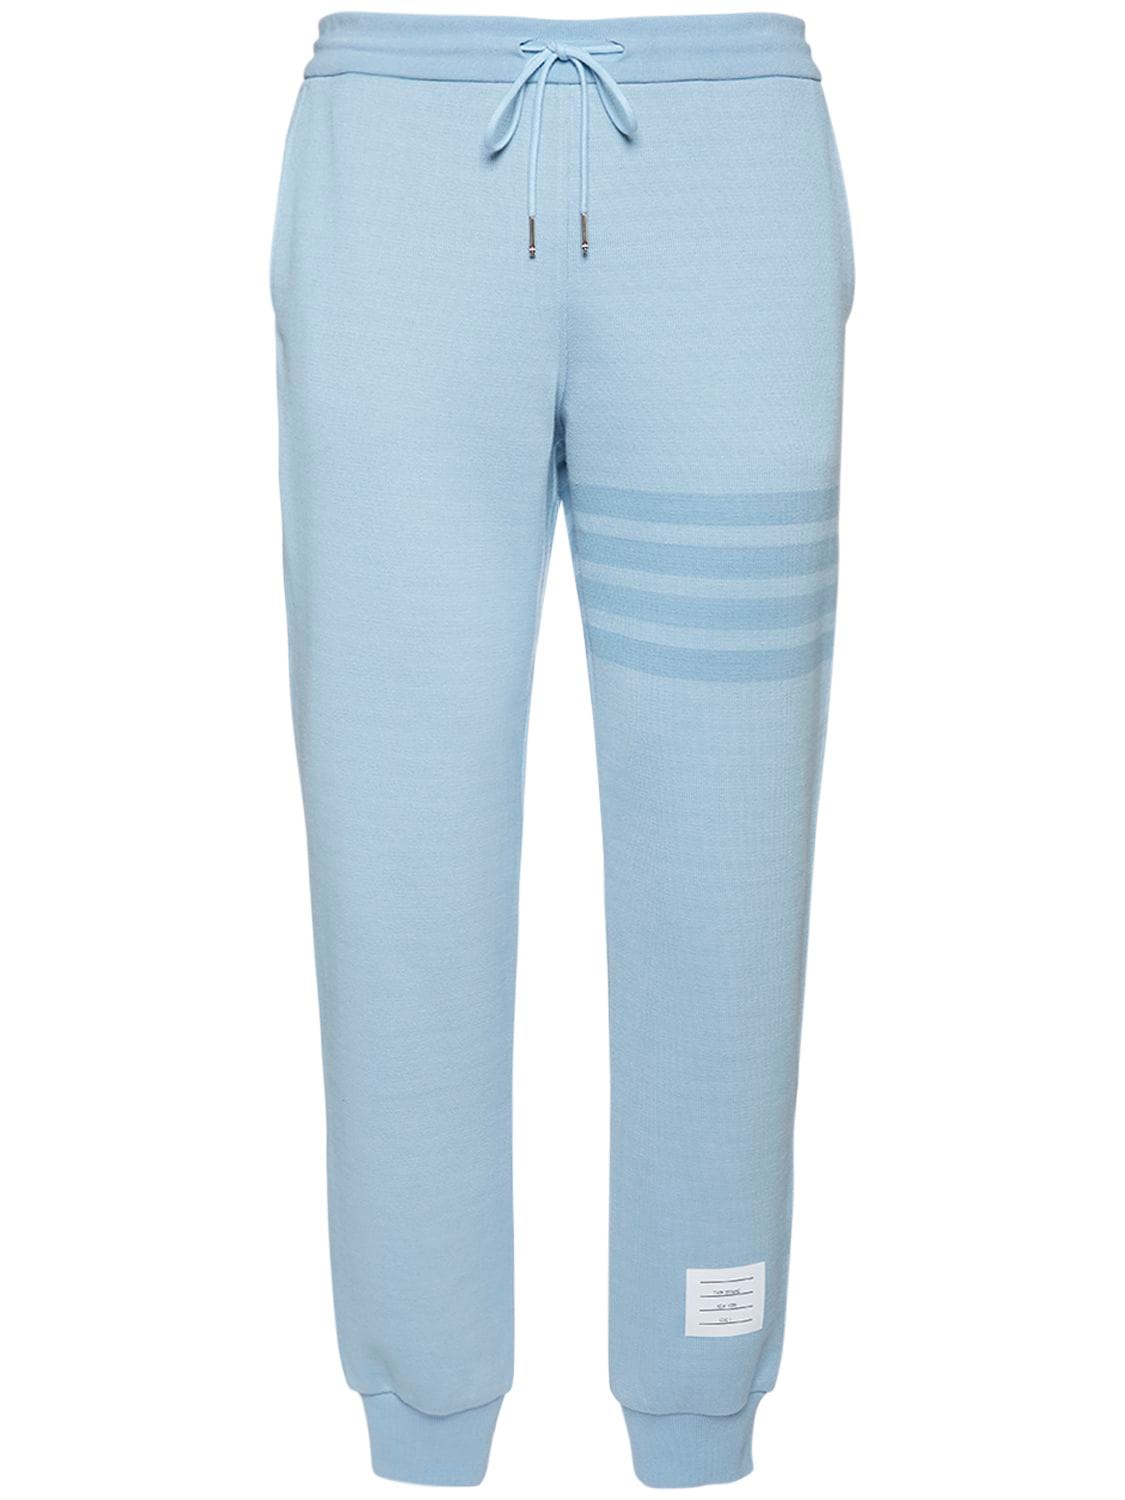 Image of Double Face Knit Sweatpants W/ Bar